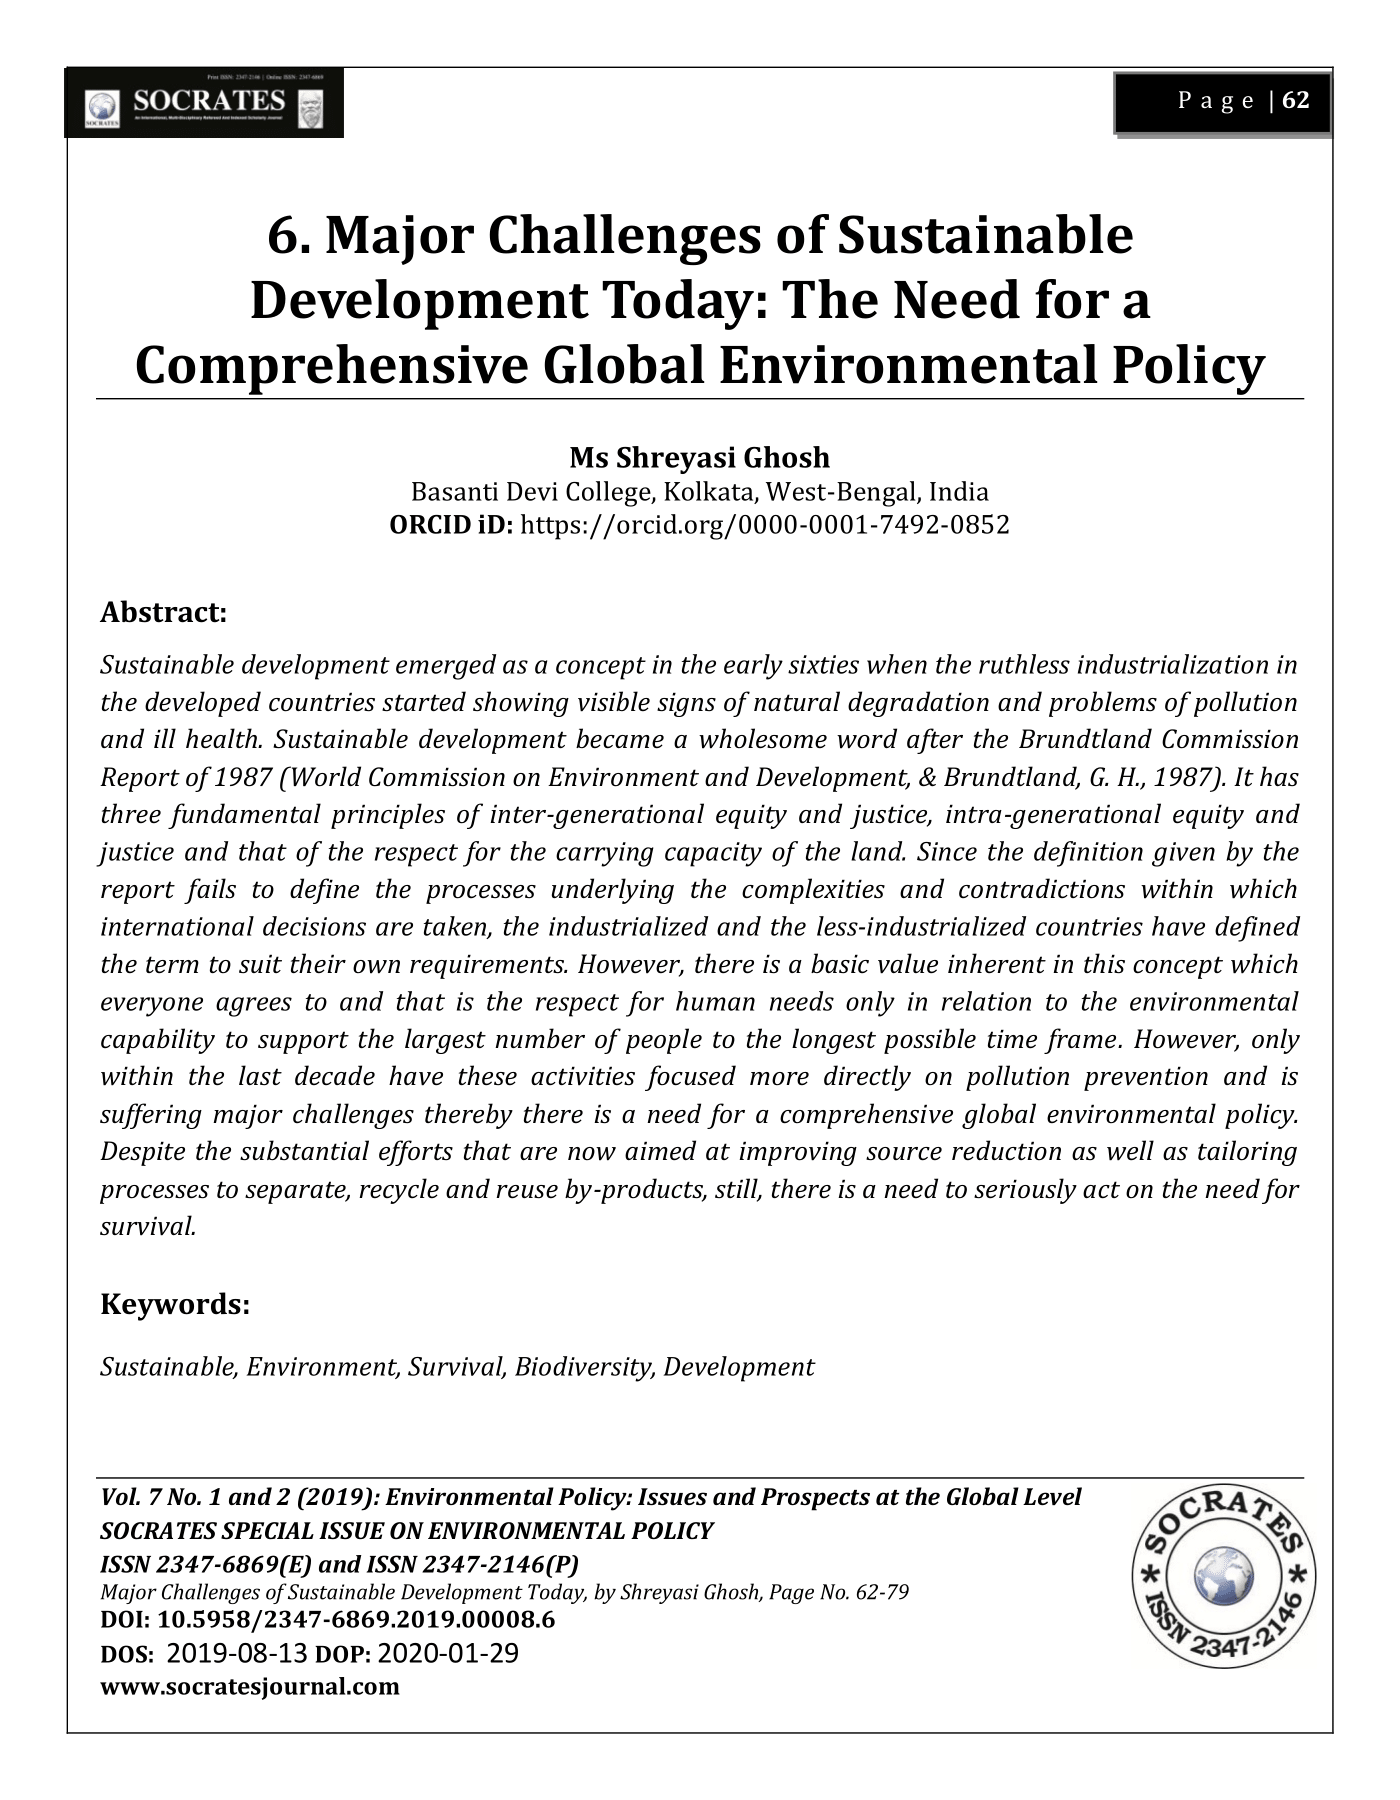 Major Challenges of Sustainable Development Today